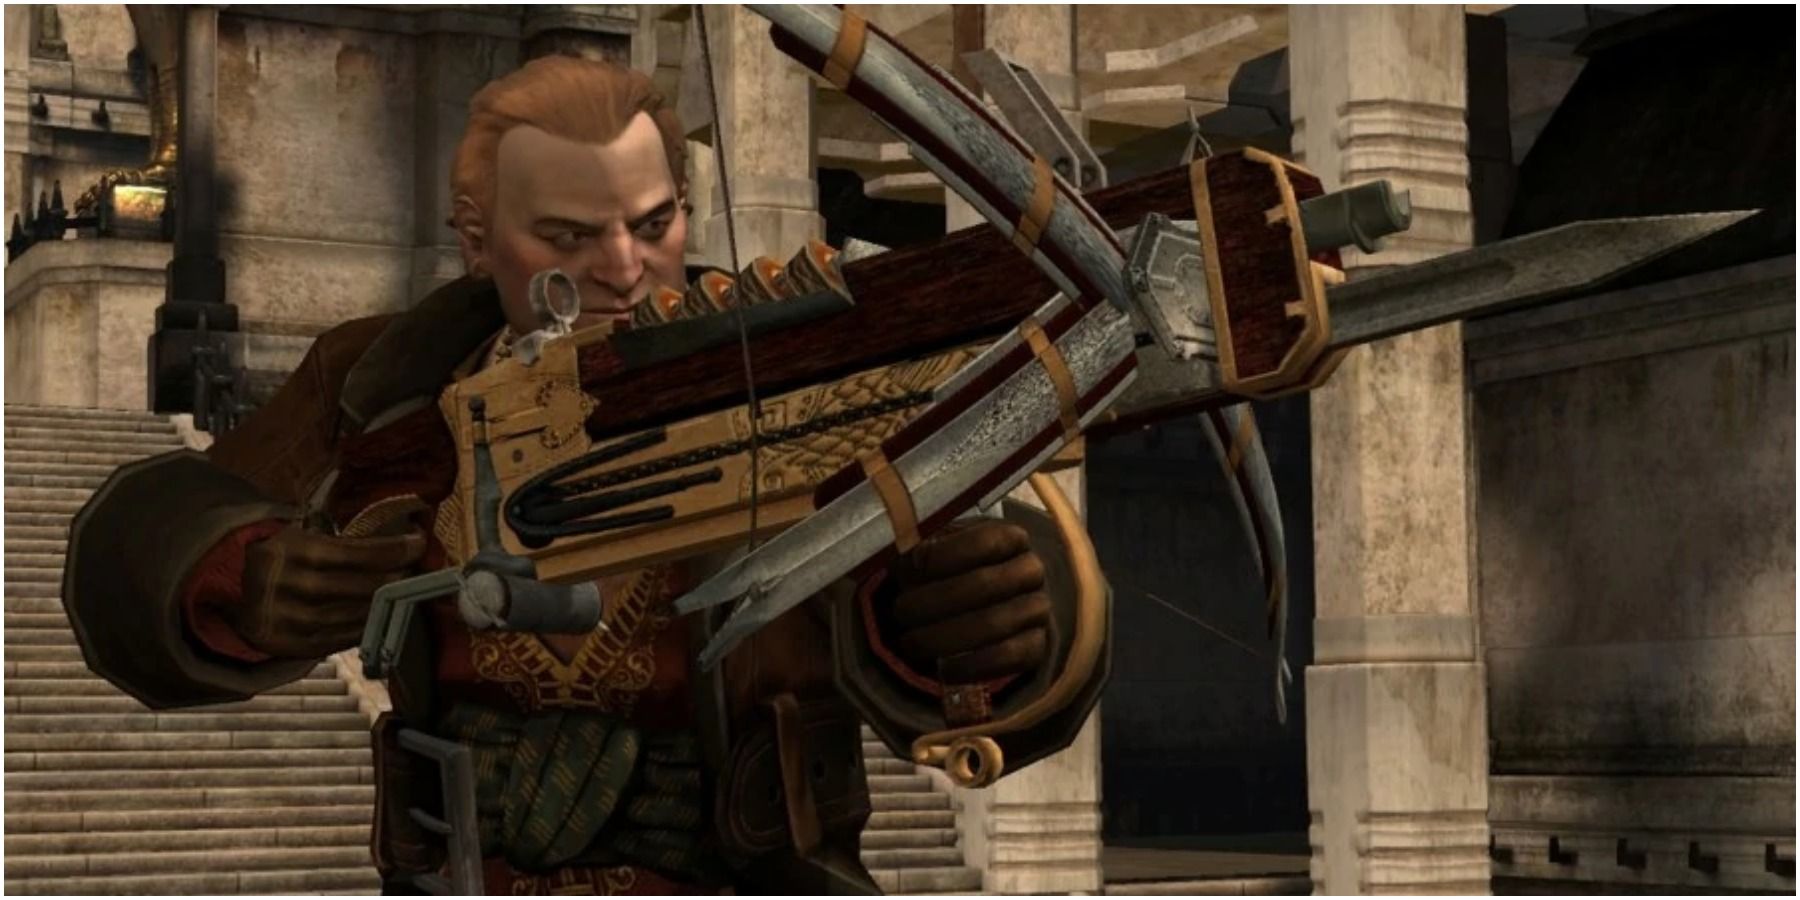 Varric with his crossbow in Dragon Age 2